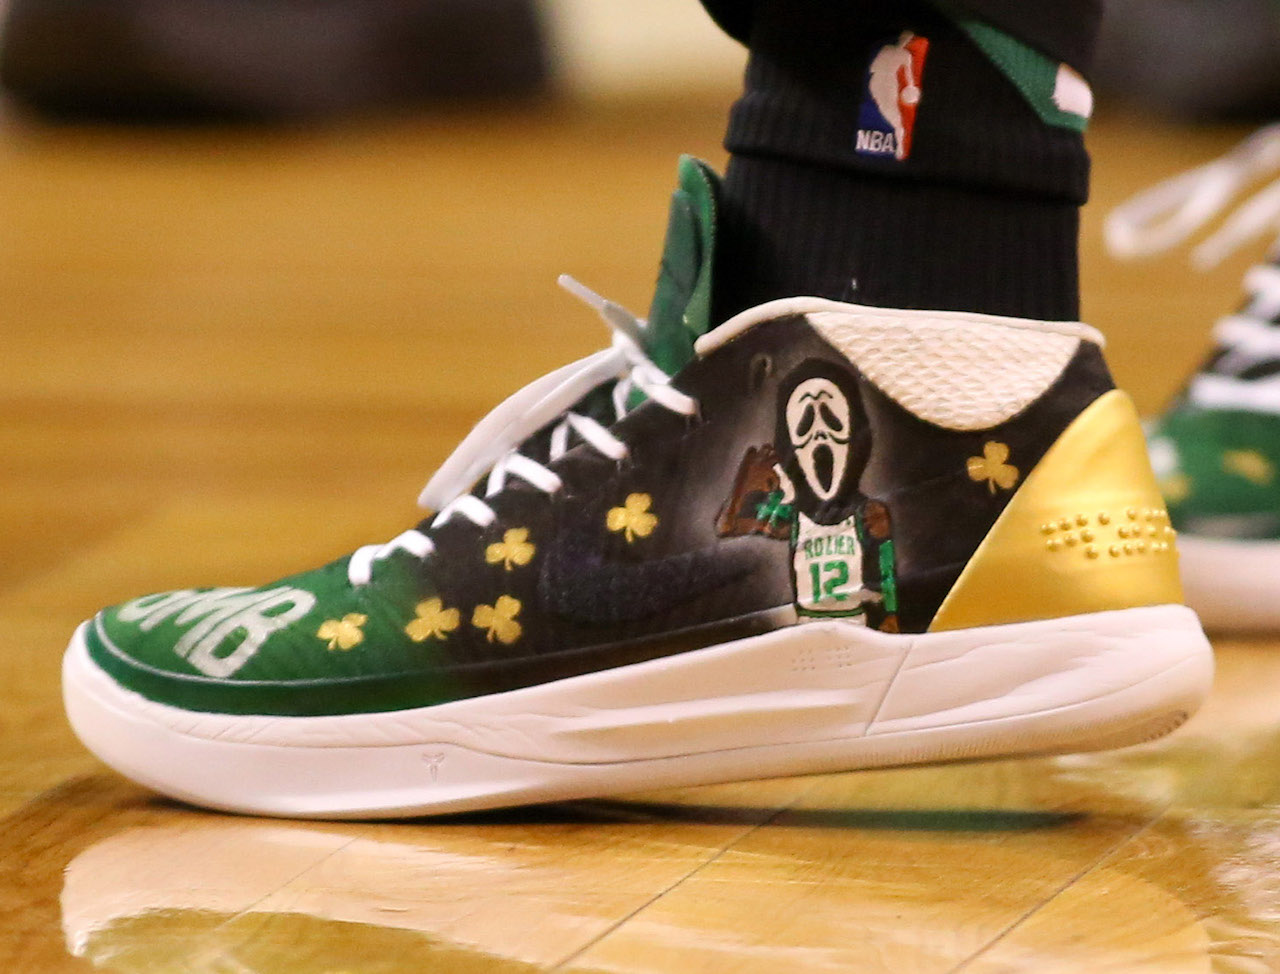 NBA sneakers of the night: Playoff P 